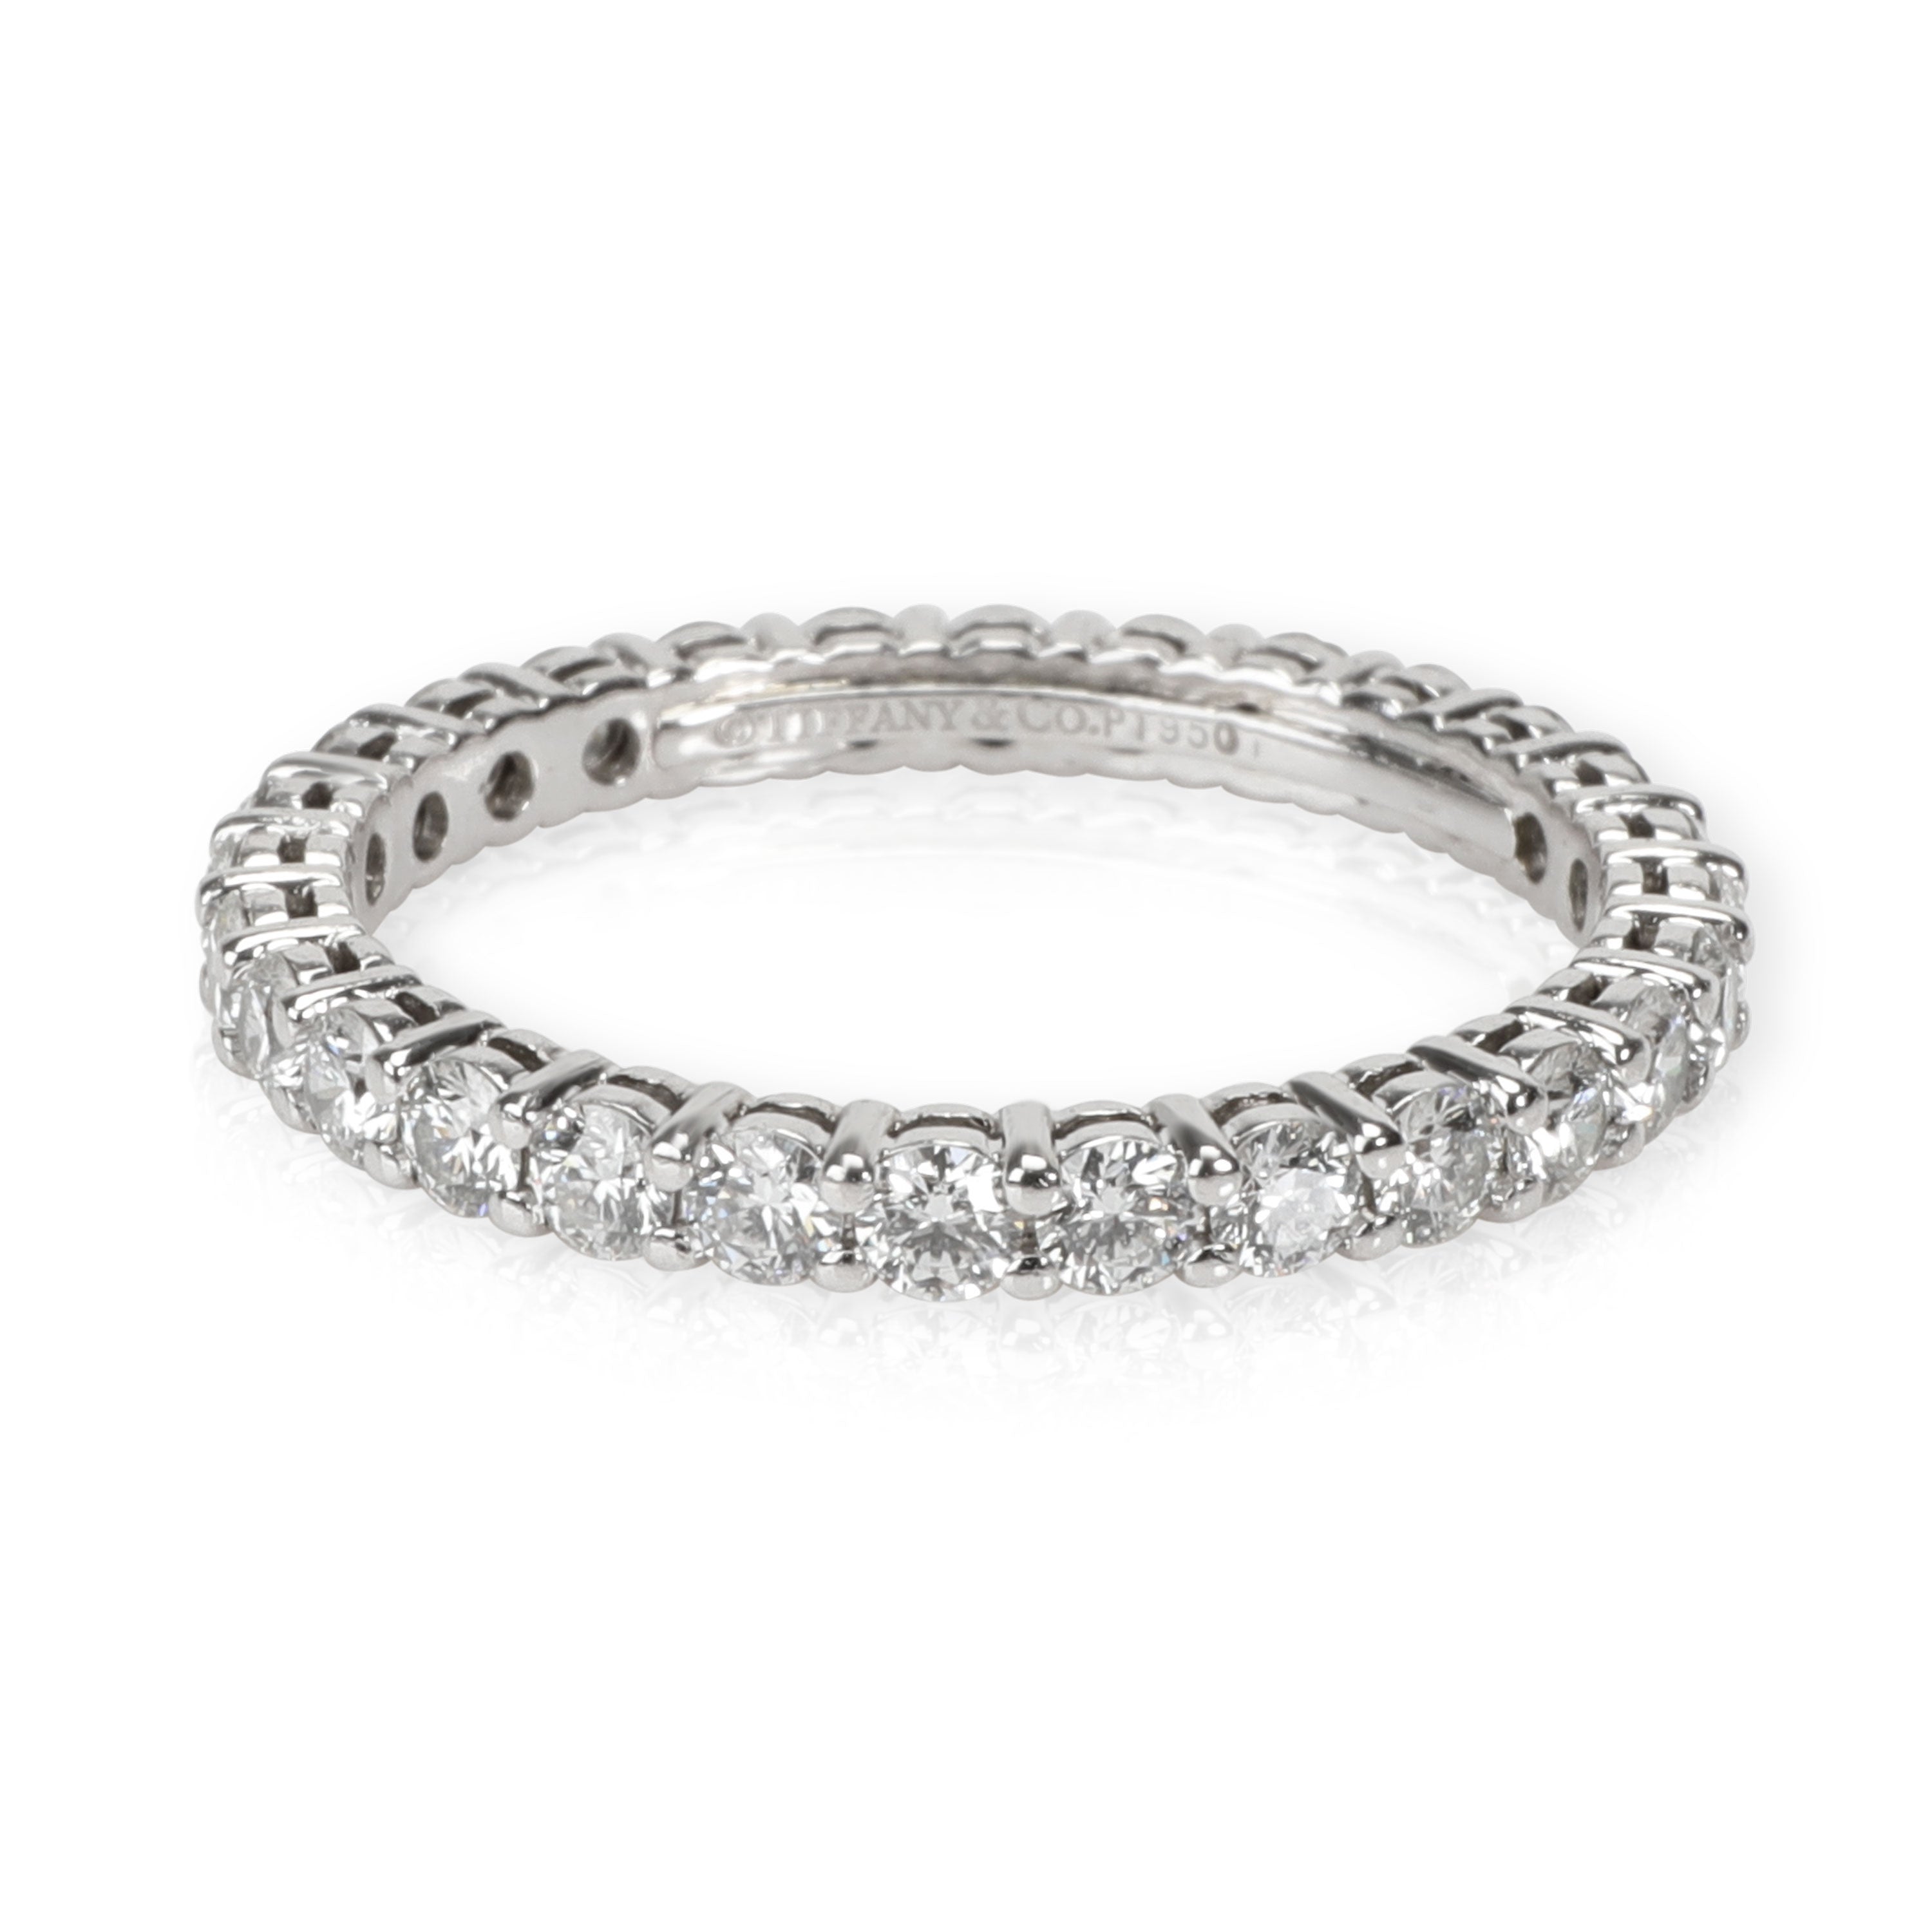 Tiffany Embrace Diamond Eternity Band in Platinum 0.84 CTW by WP